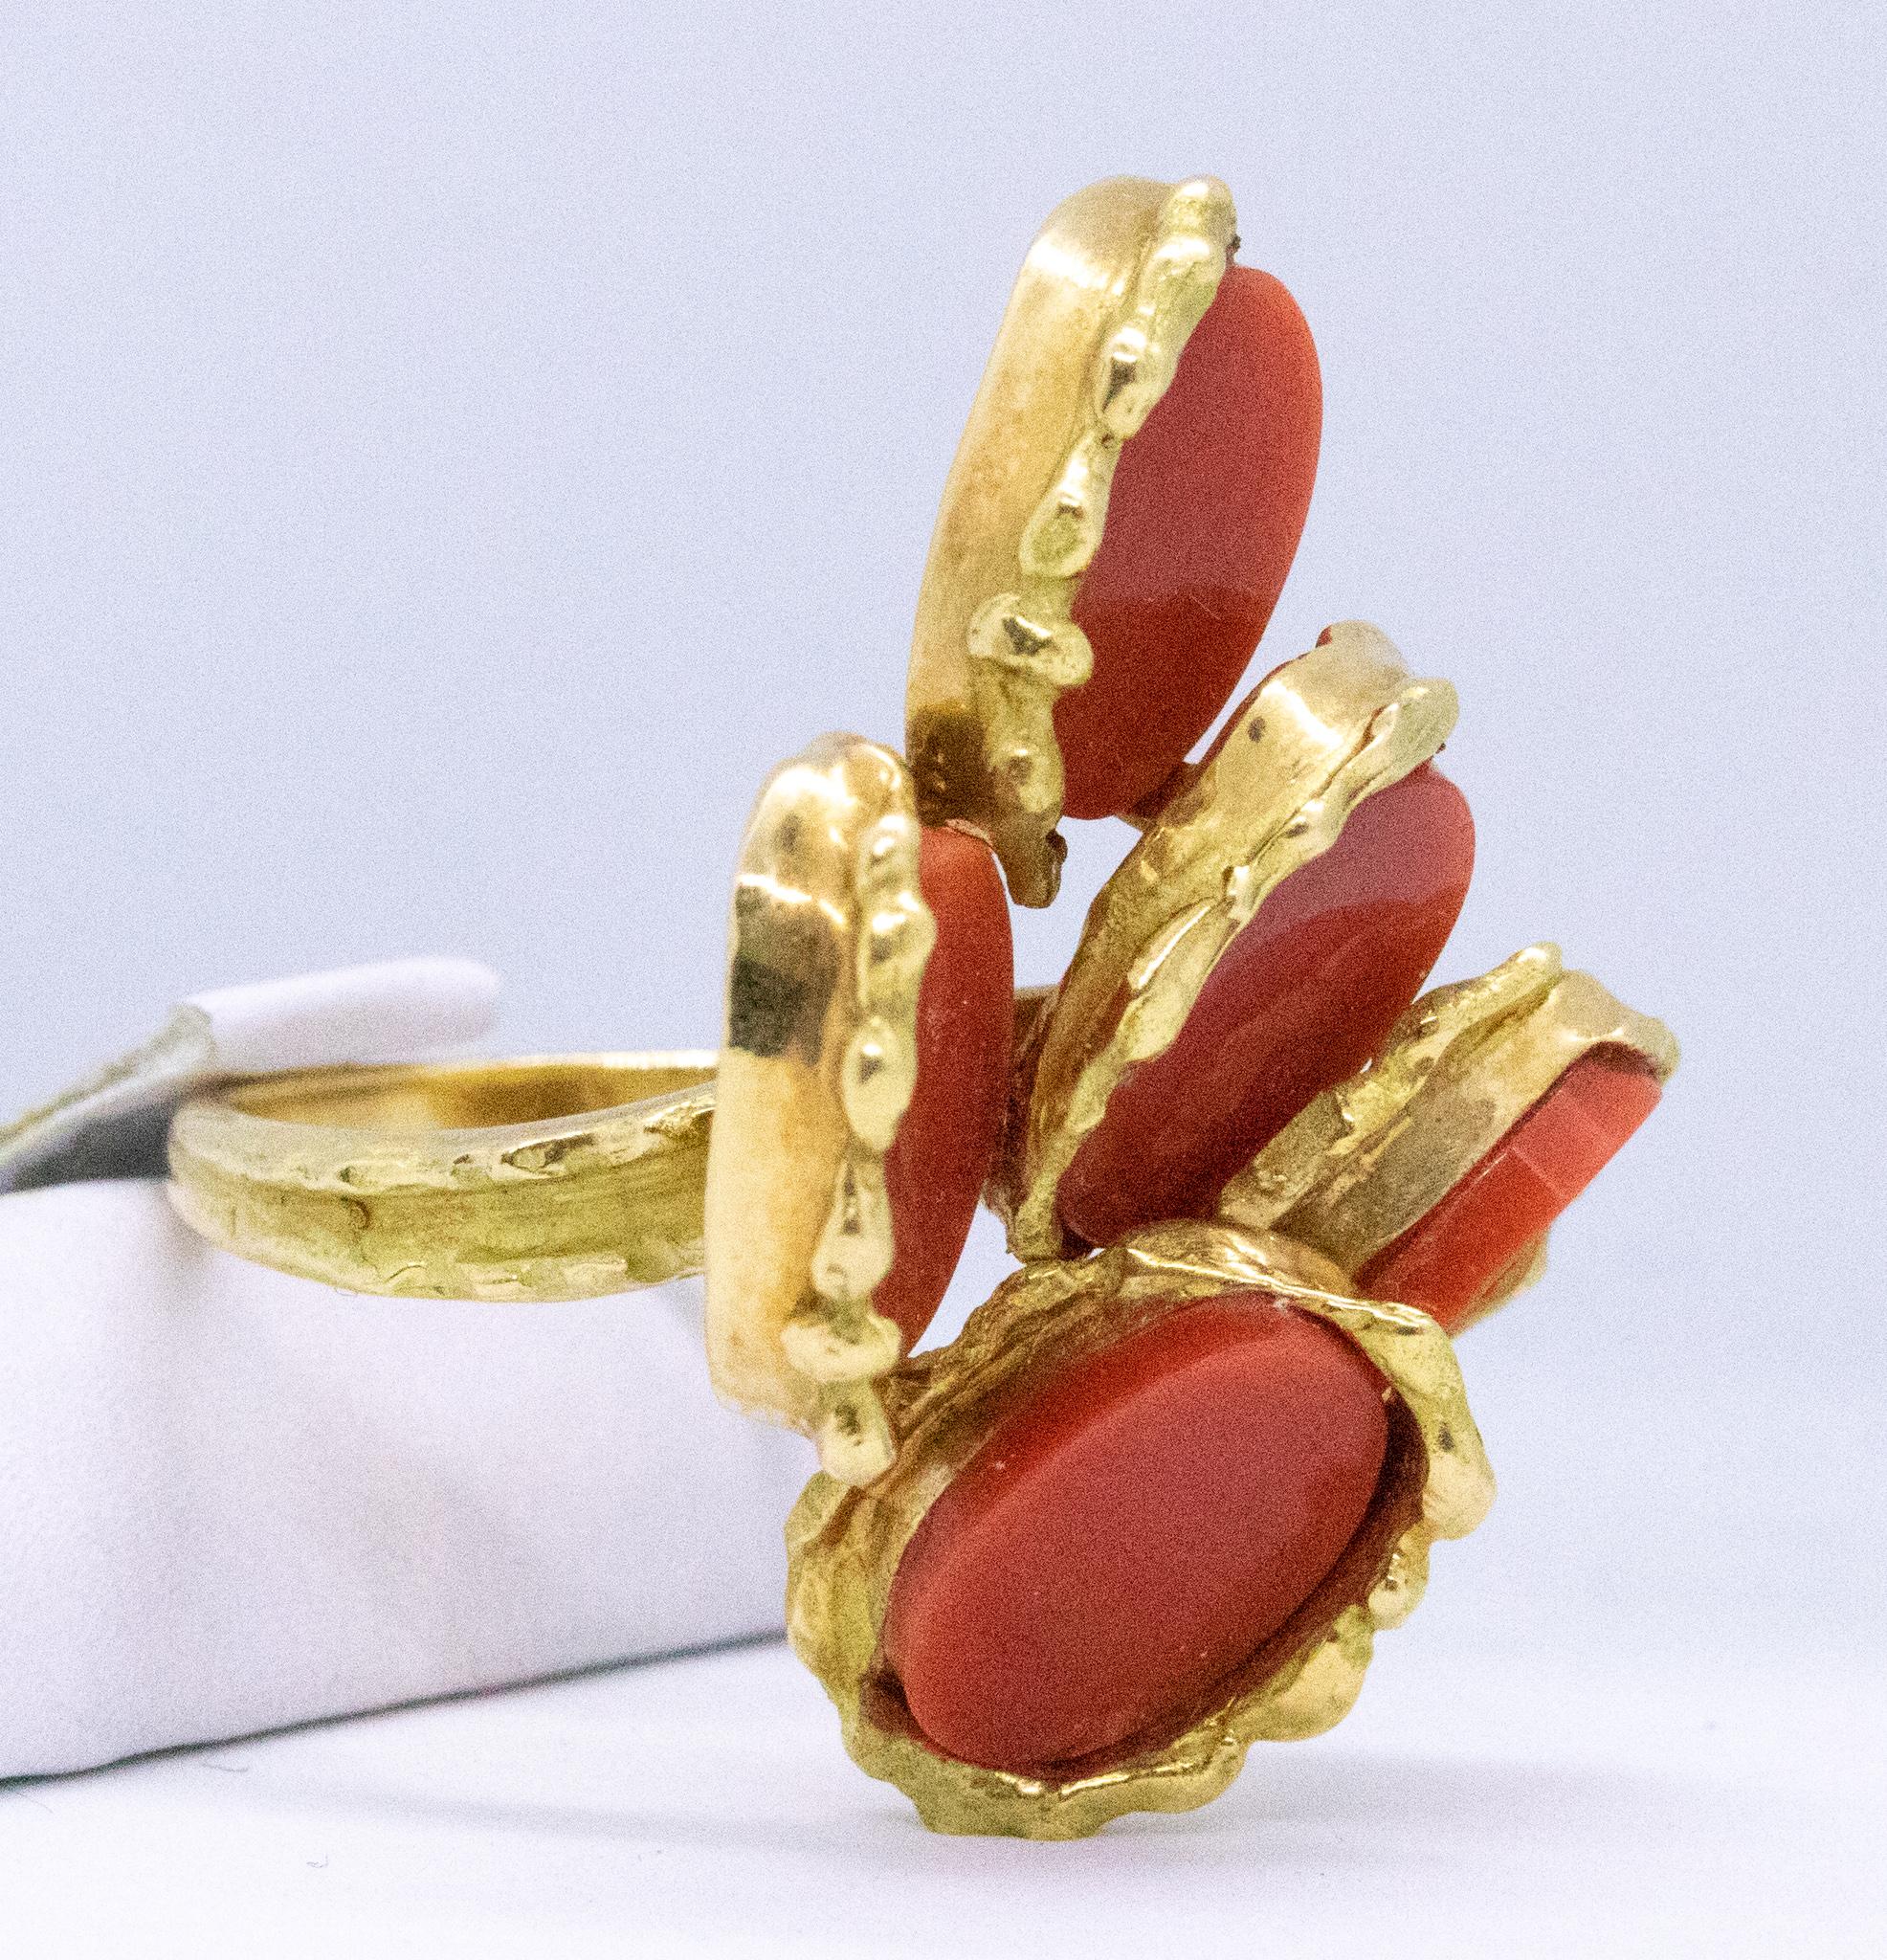 Women's Chaumet 1970 Paris Retro Cocktail Ring in 18Kt Gold with Red Coral Carvings For Sale